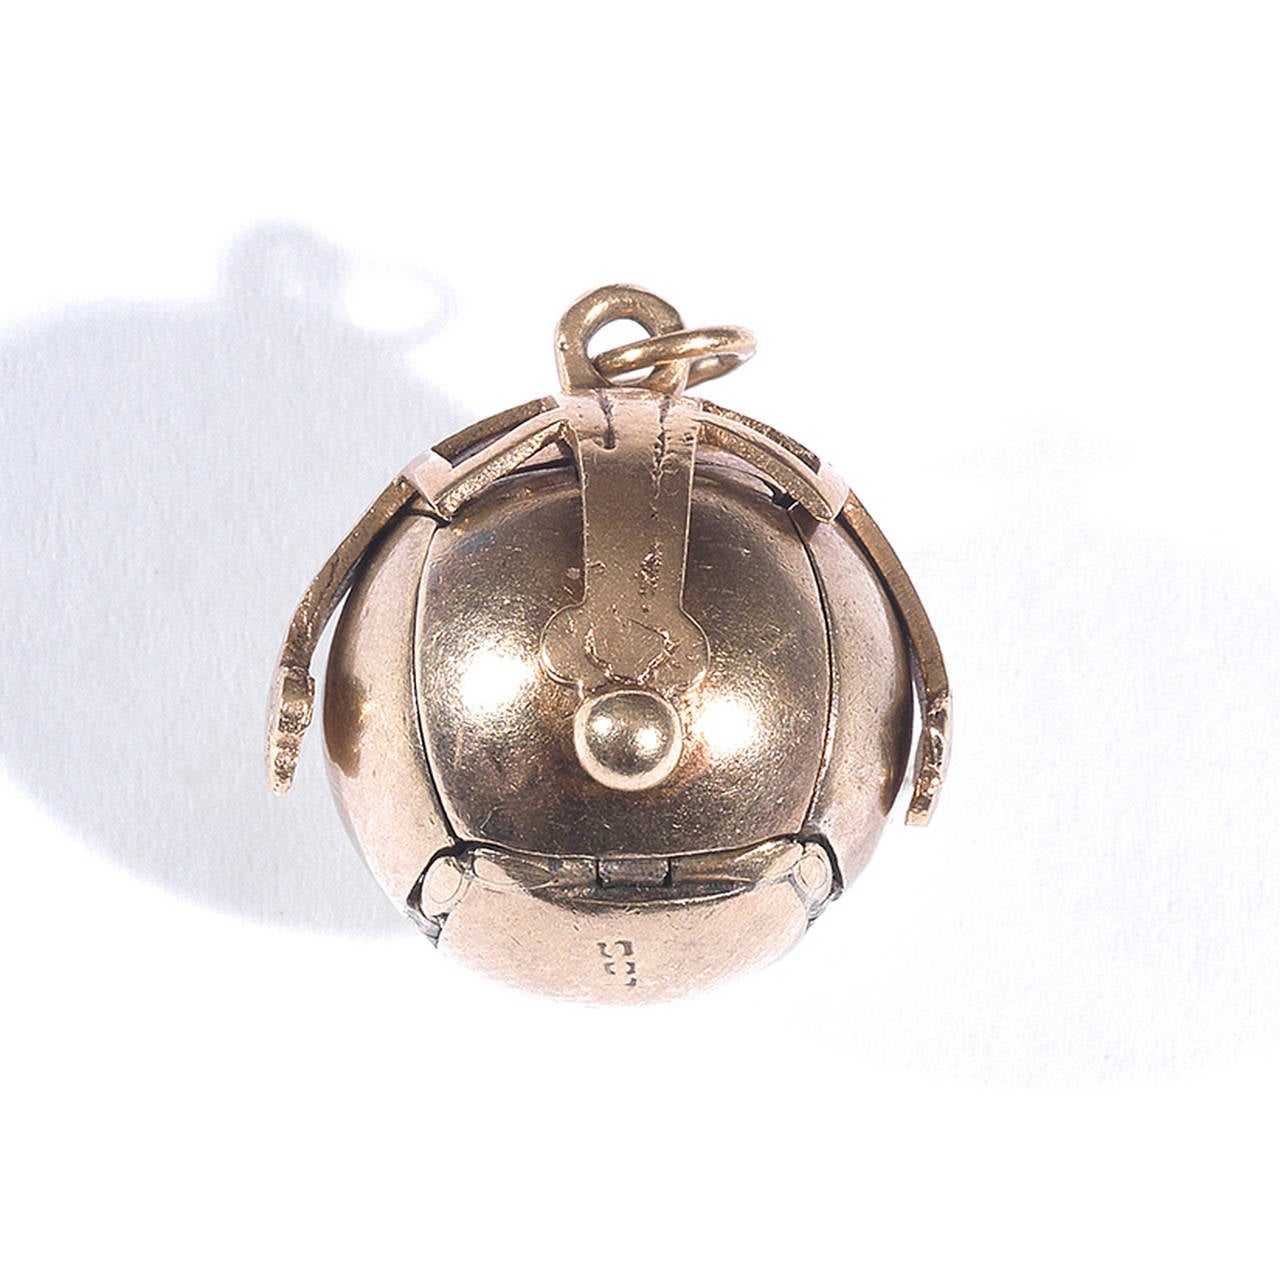 Of typical sphere design opening to form a cross and engraved with Masonic symbols

Mounted in 9Kt gold

51 mm long when open, 17 mm diameter when closed